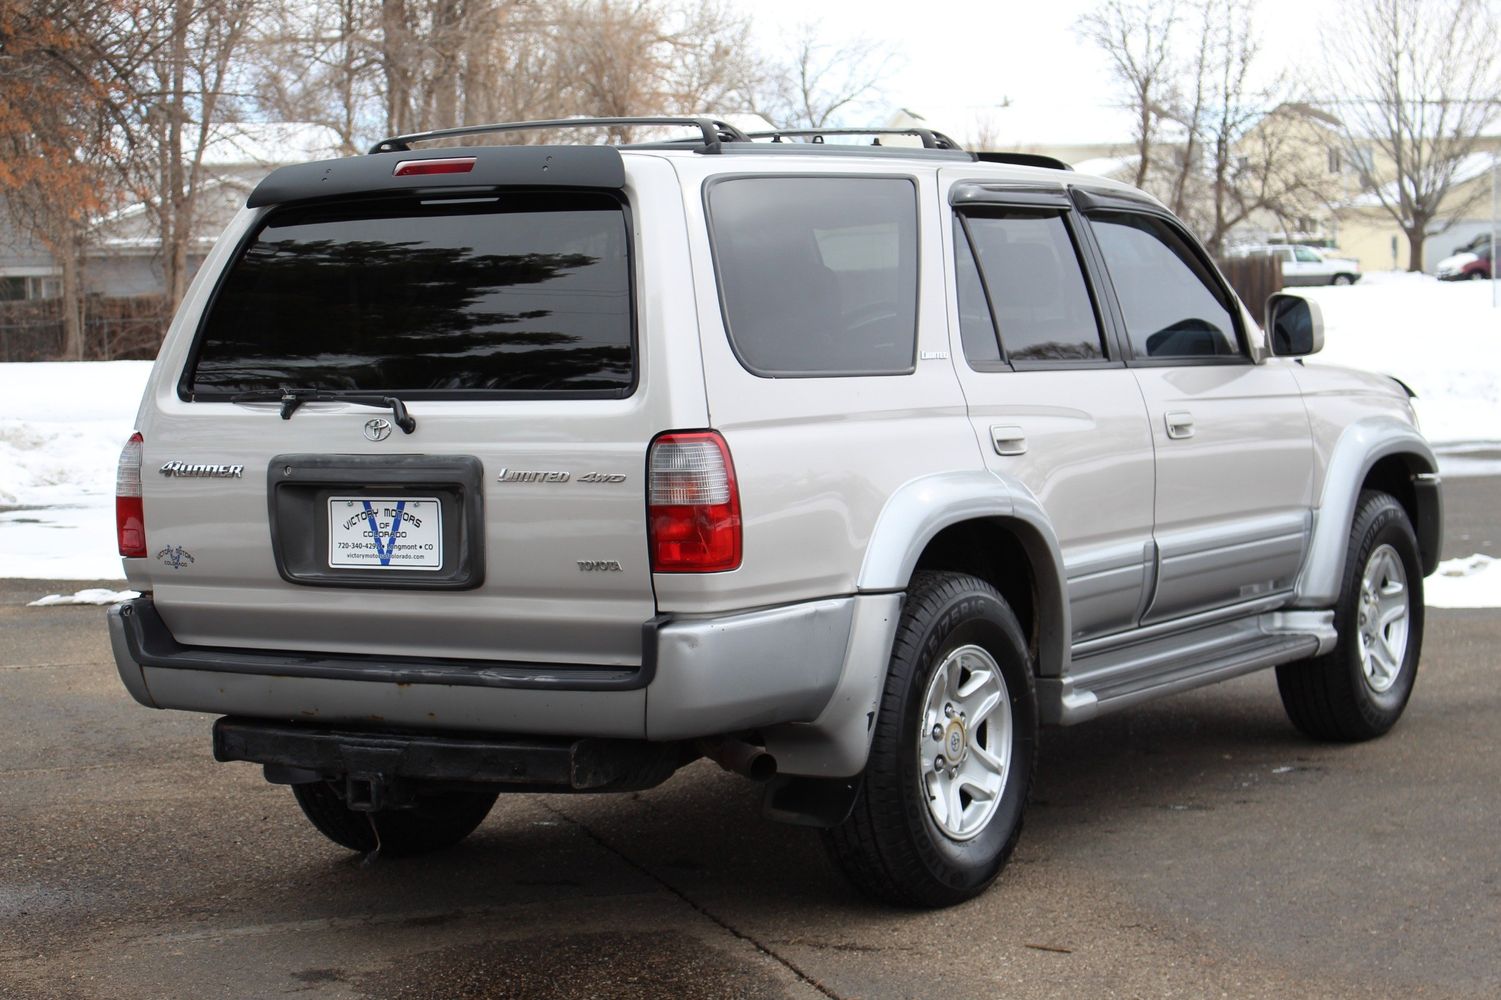 2000 Toyota 4Runner Limited | Victory Motors of Colorado 2000 Toyota 4runner V6 Towing Capacity